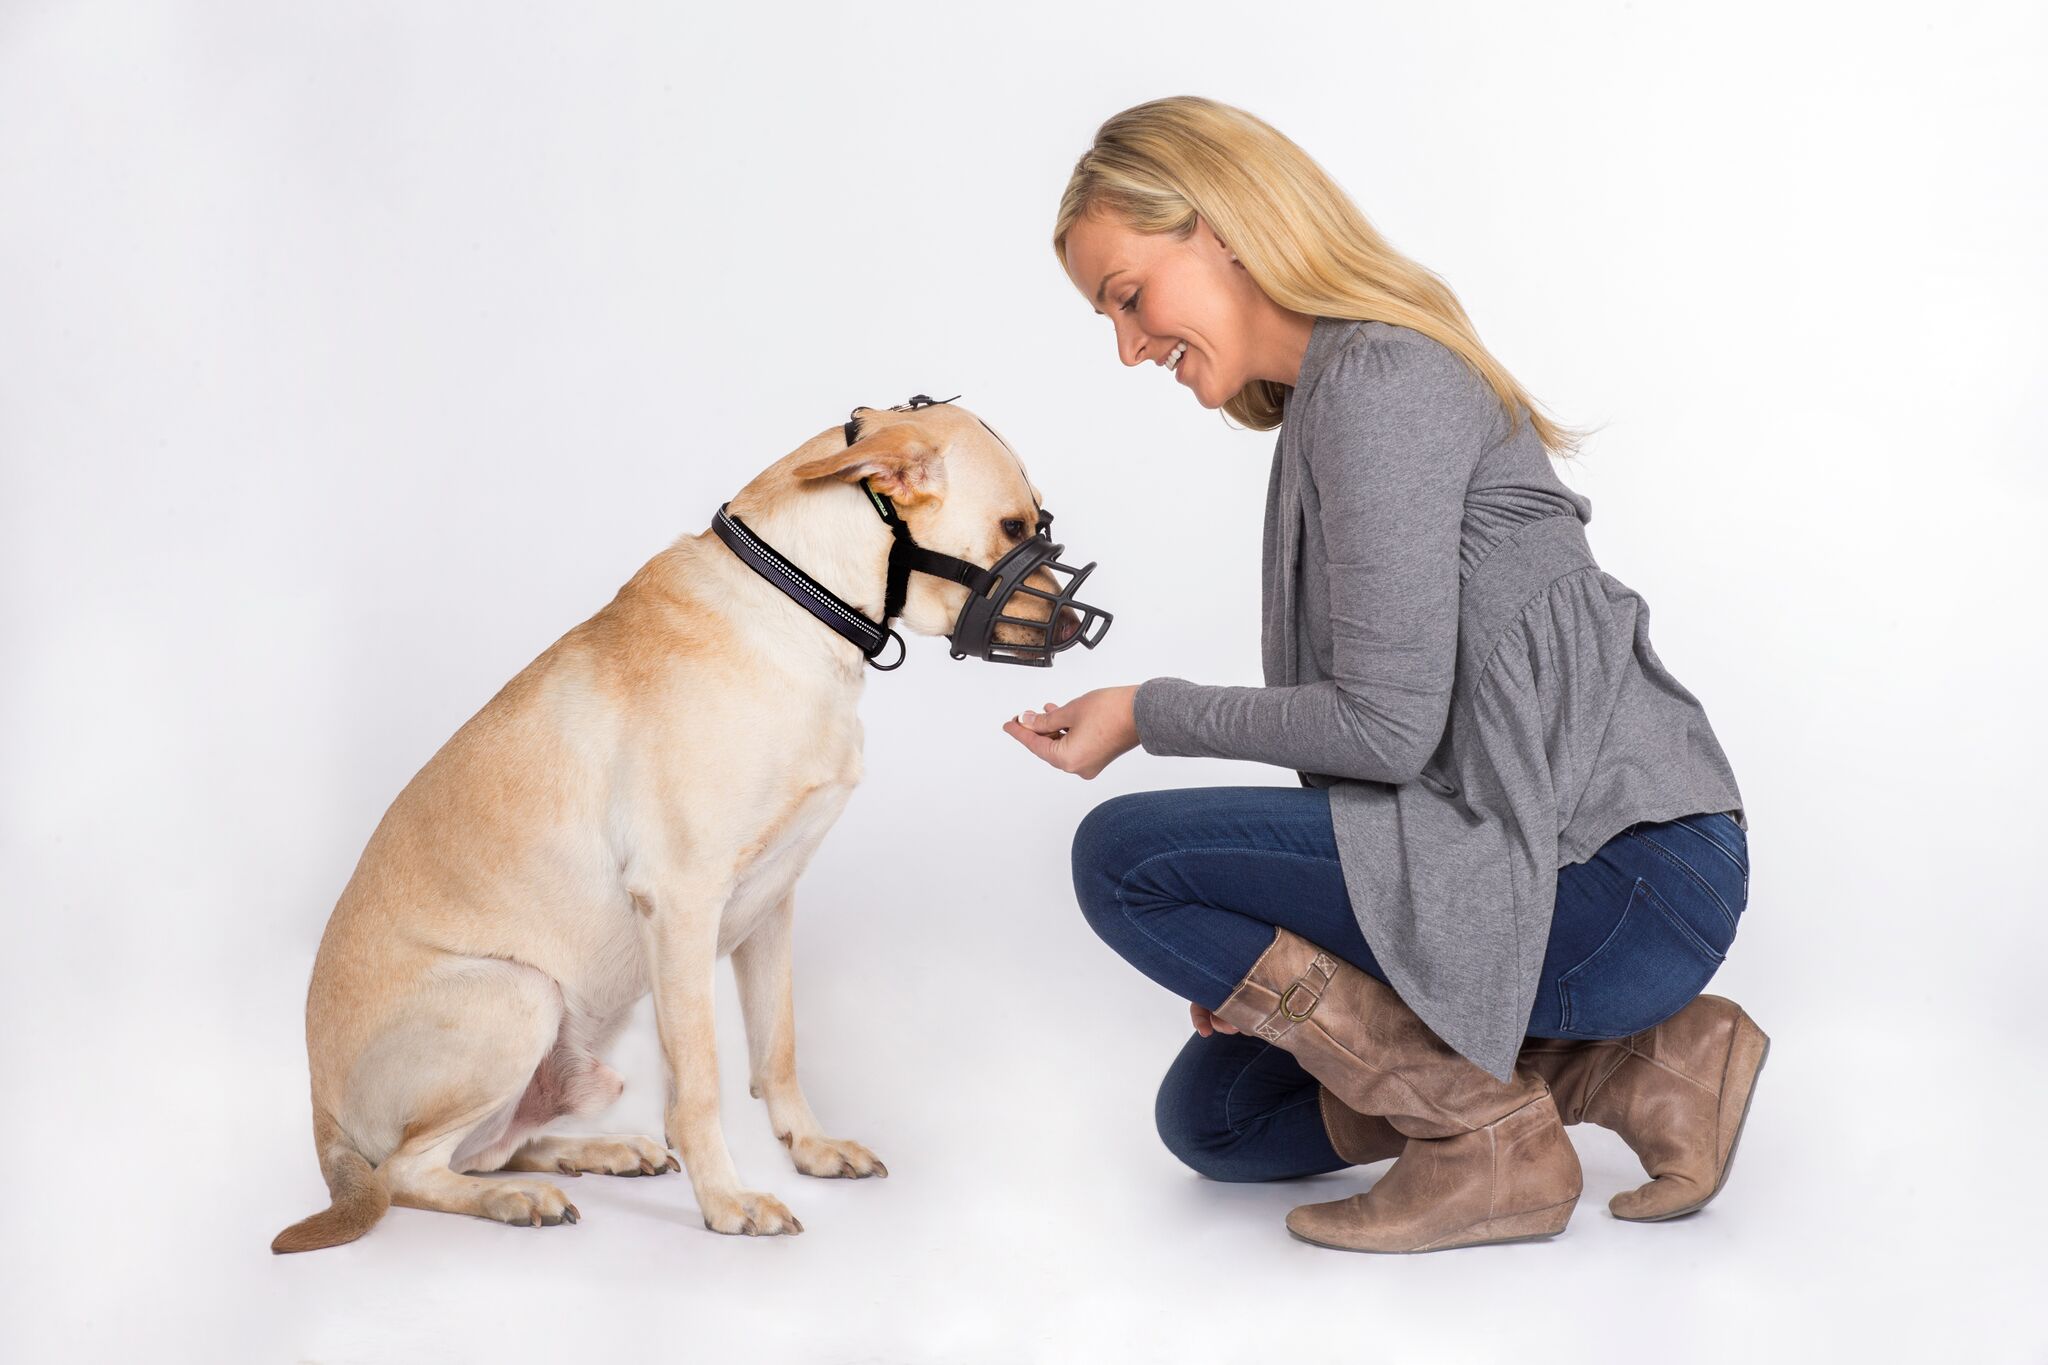 woman feeding a dog a treat while dog wears baskerville ultra muzzle